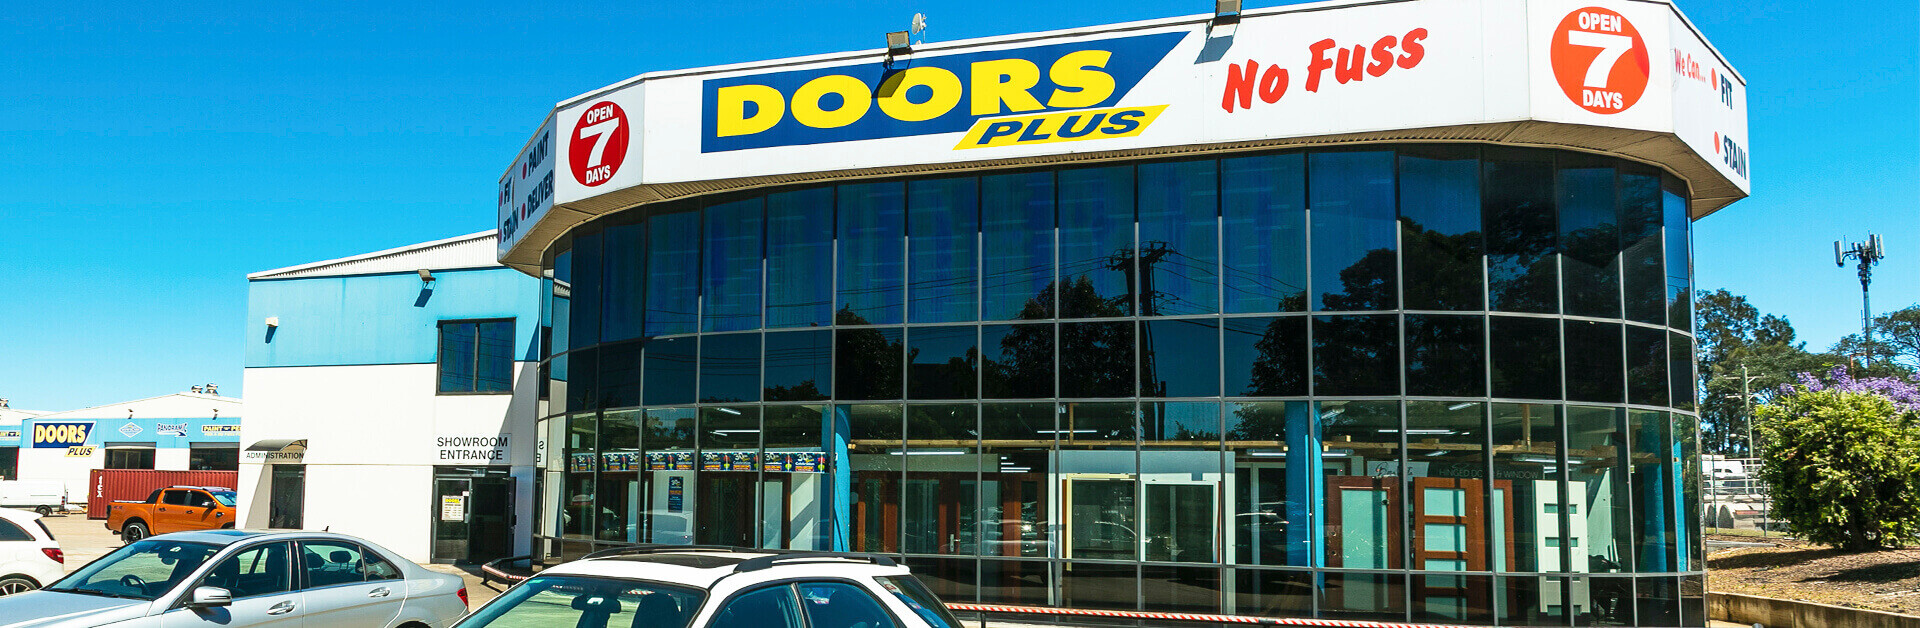 Doors Plus Minchinbury Store in Sydney, New South Wales outer view